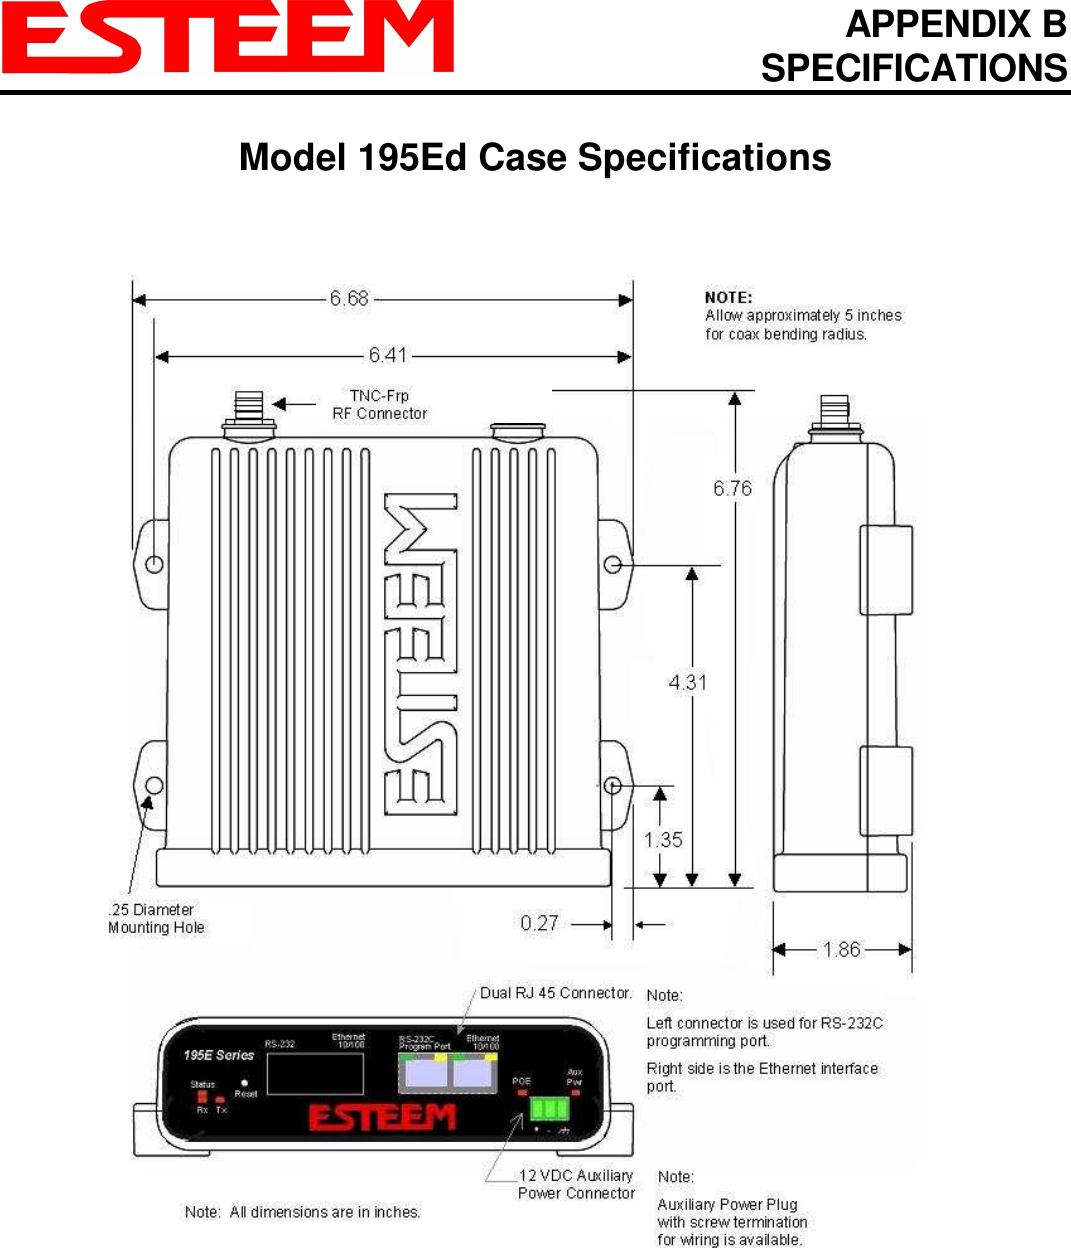 APPENDIX B SPECIFICATIONS   Model 195Ed Case Specifications   